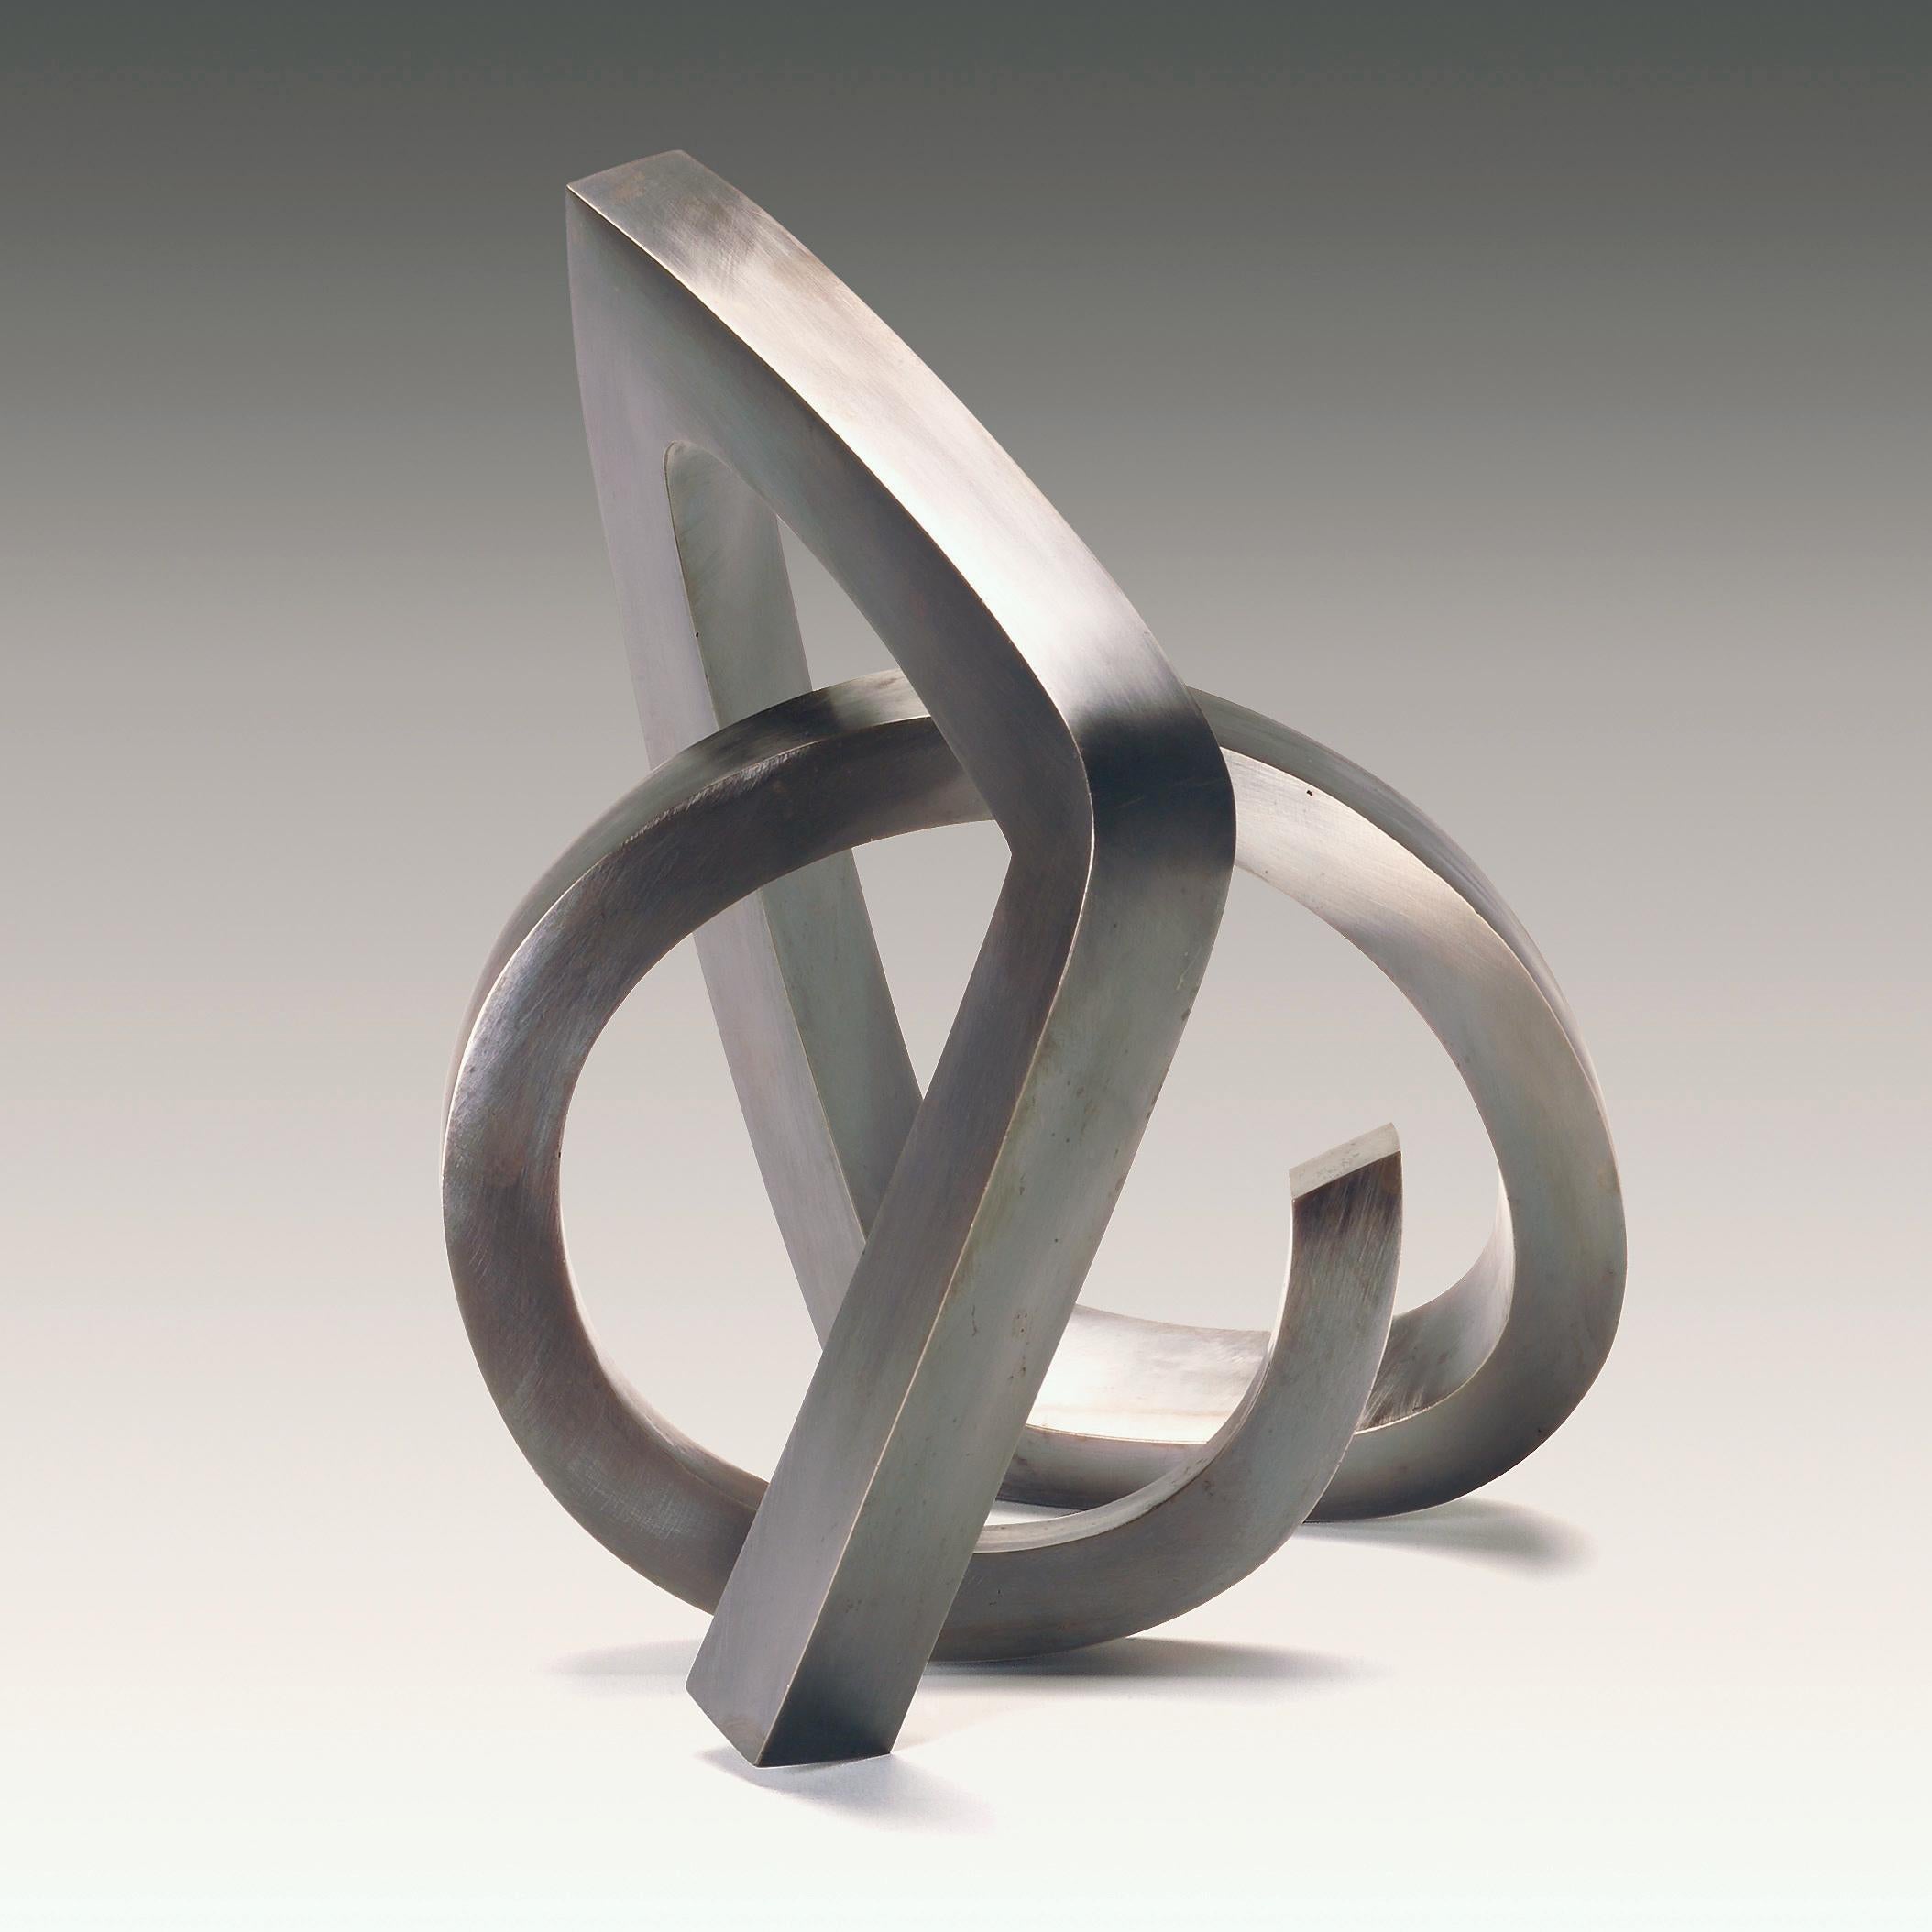 Silver Sculpture 'Curva II' by Carola Eggeling
Abstract sculpture with beautiful curved lines.

German silver sculpture
Silver - Alpaca 
Certificate of authenticity
Numbered and signed artwork
Limited edition of 9
Measures: H. 34 x 30 x 29